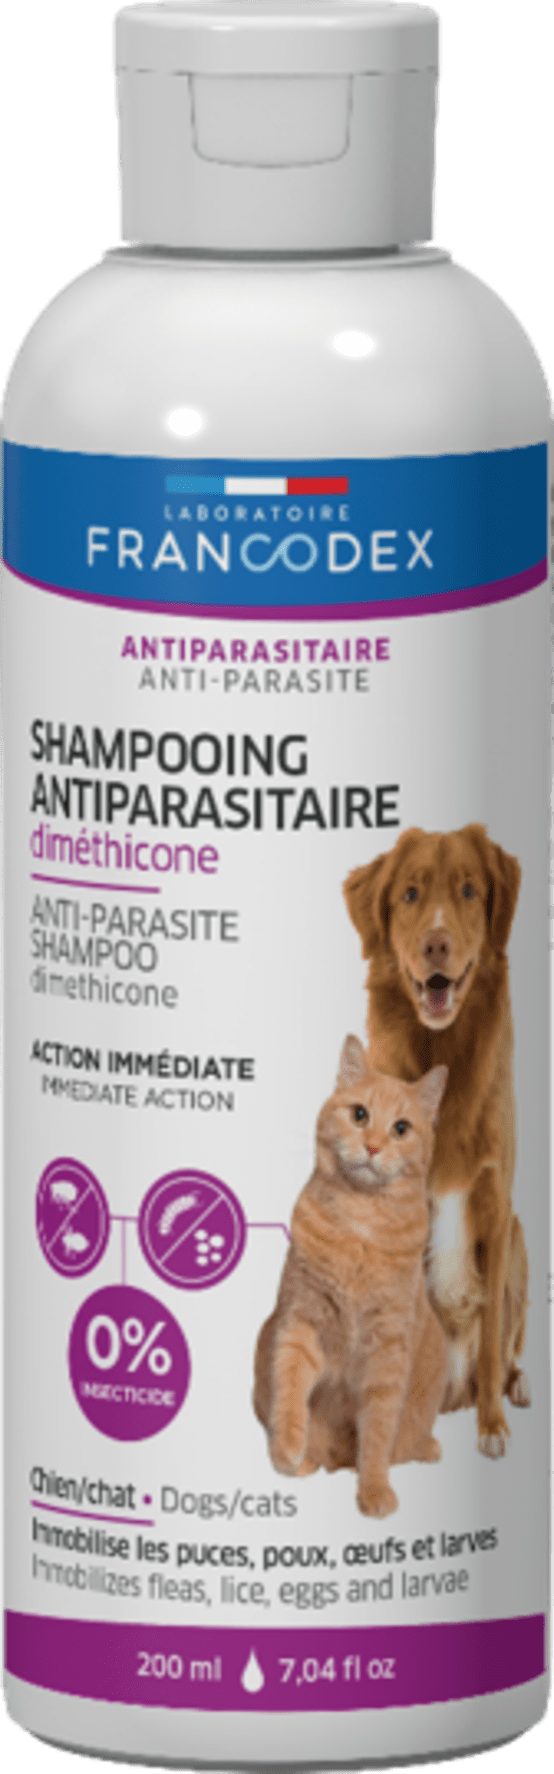 Shampoing anti-démangeaisons pour chiens 250ml Francodex